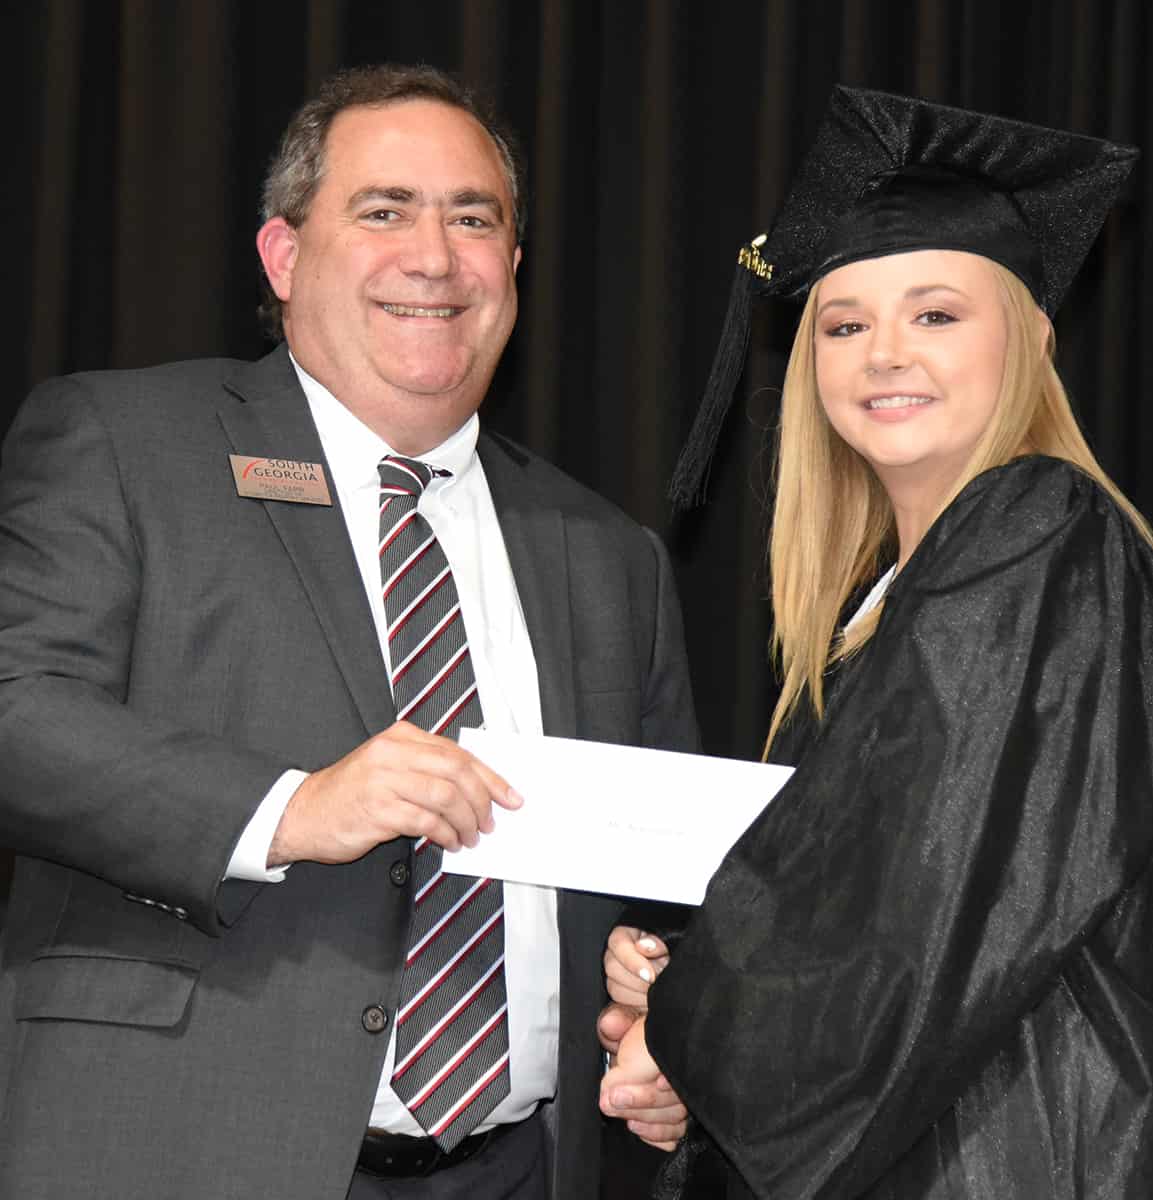 Paul Farr, Board member of the Americus Sumter County Chamber of Commerce and Director of Business and Industry Services at South Georgia Technical College (l), is shown above with Alanna Yawn (r), the Chamber of Commerce 2018 Platinum Trustee Scholarship winner. The scholarship is sponsored by the Platinum Trustees of the Chamber of Commerce.